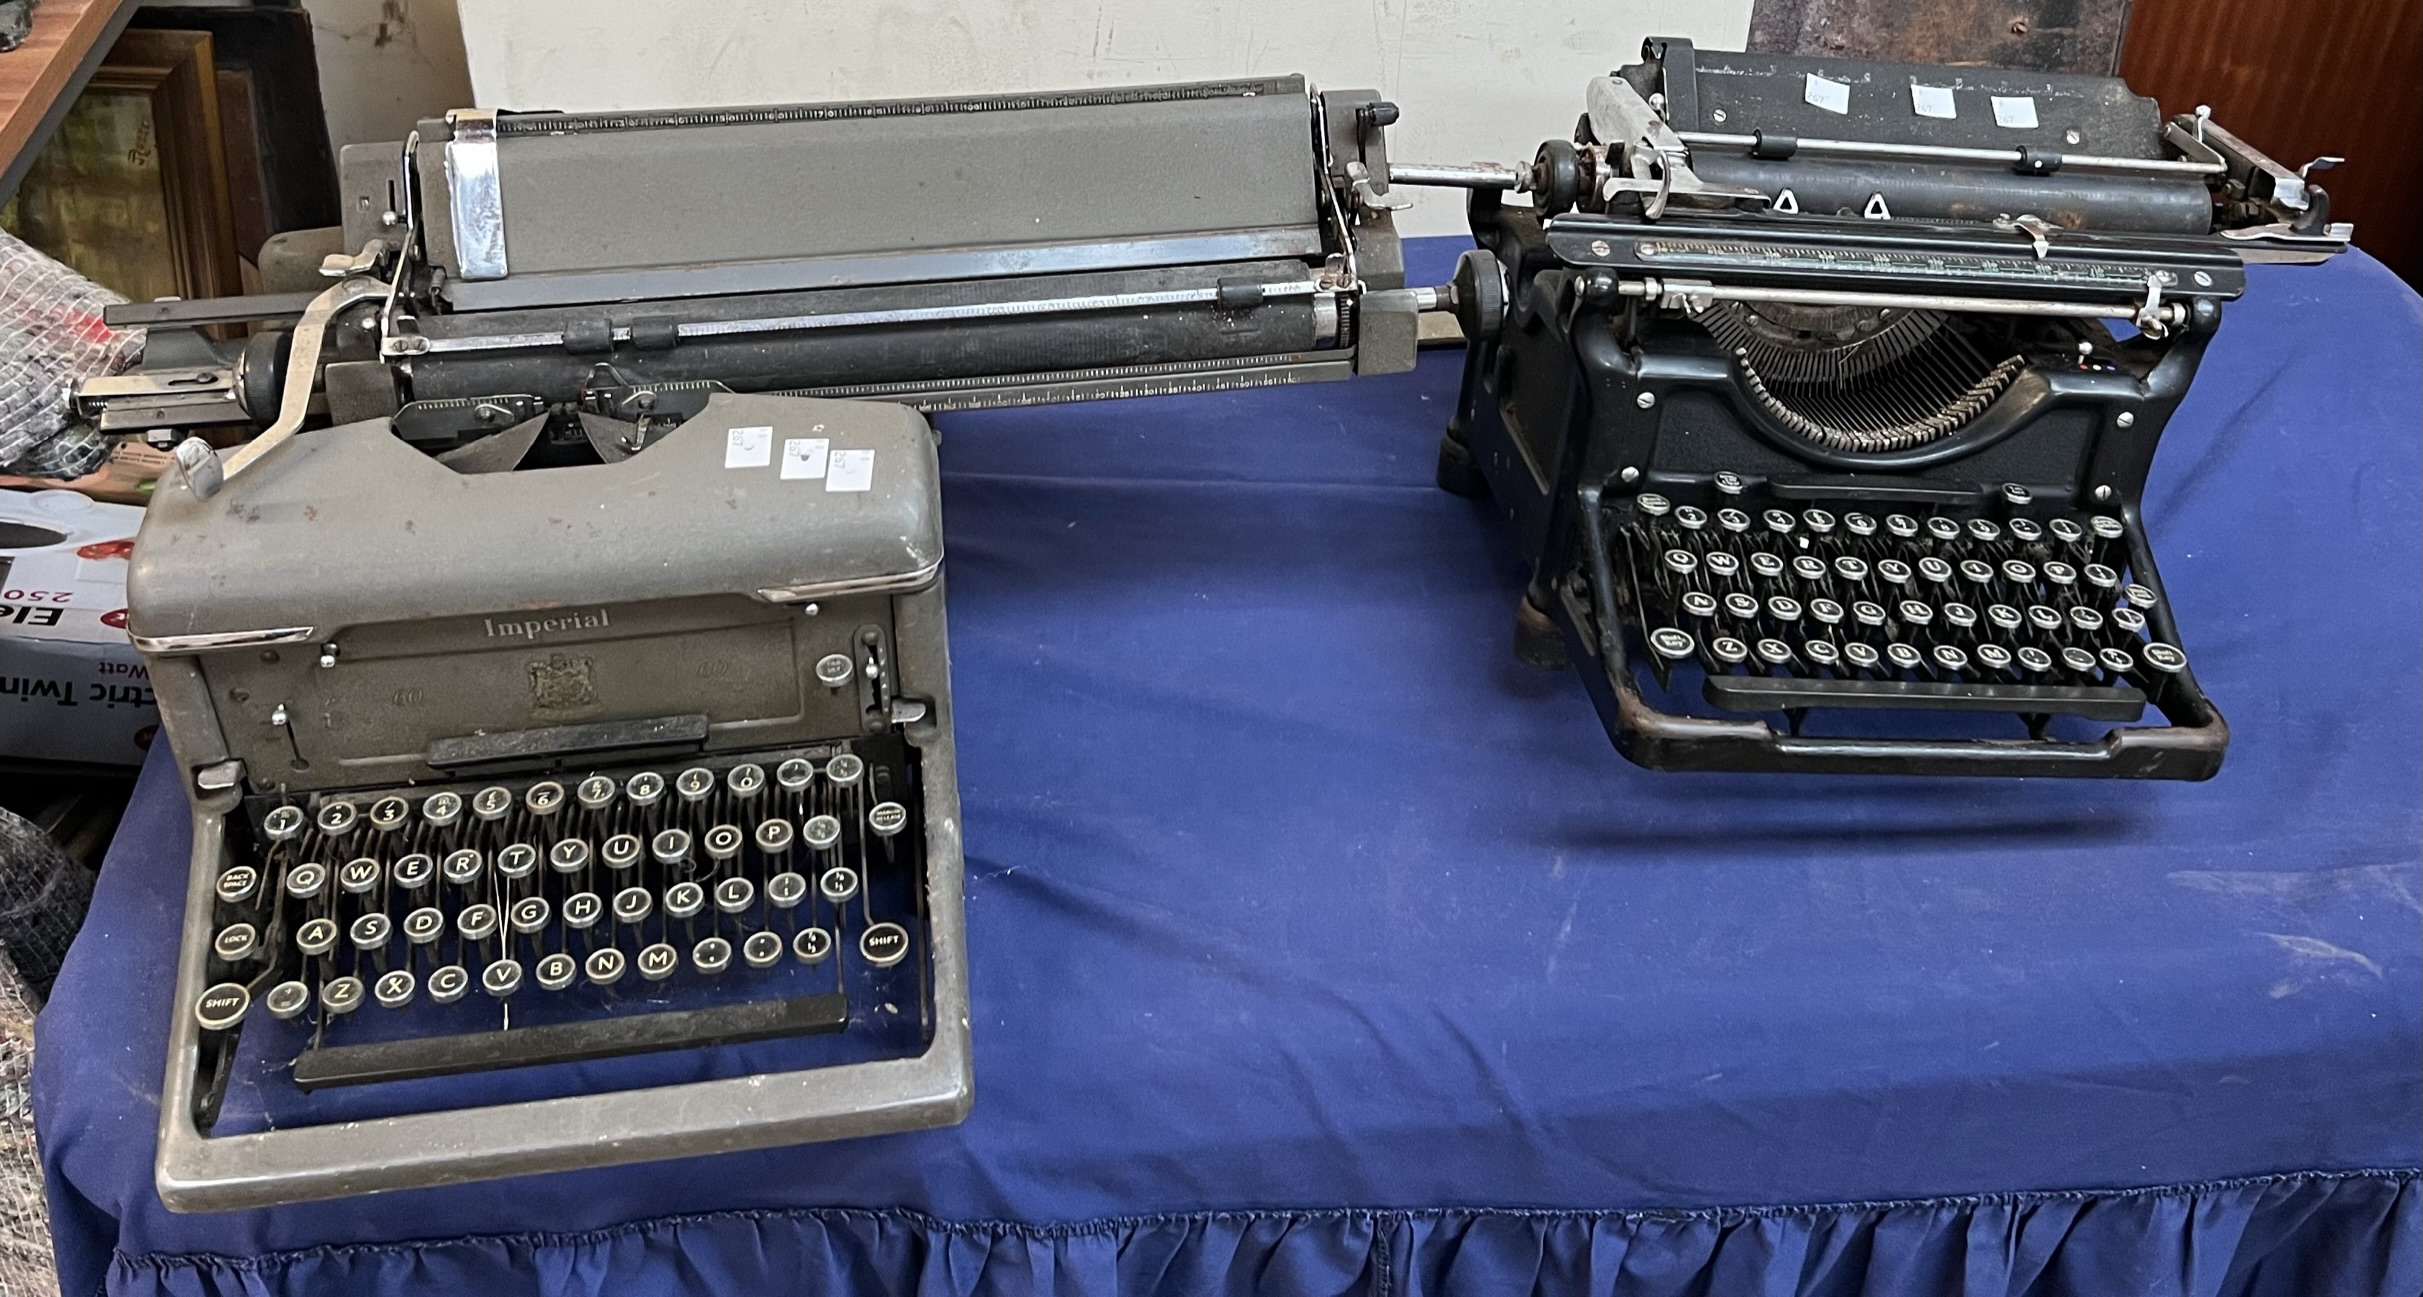 An imperial 60 typewriter together with another typewriter